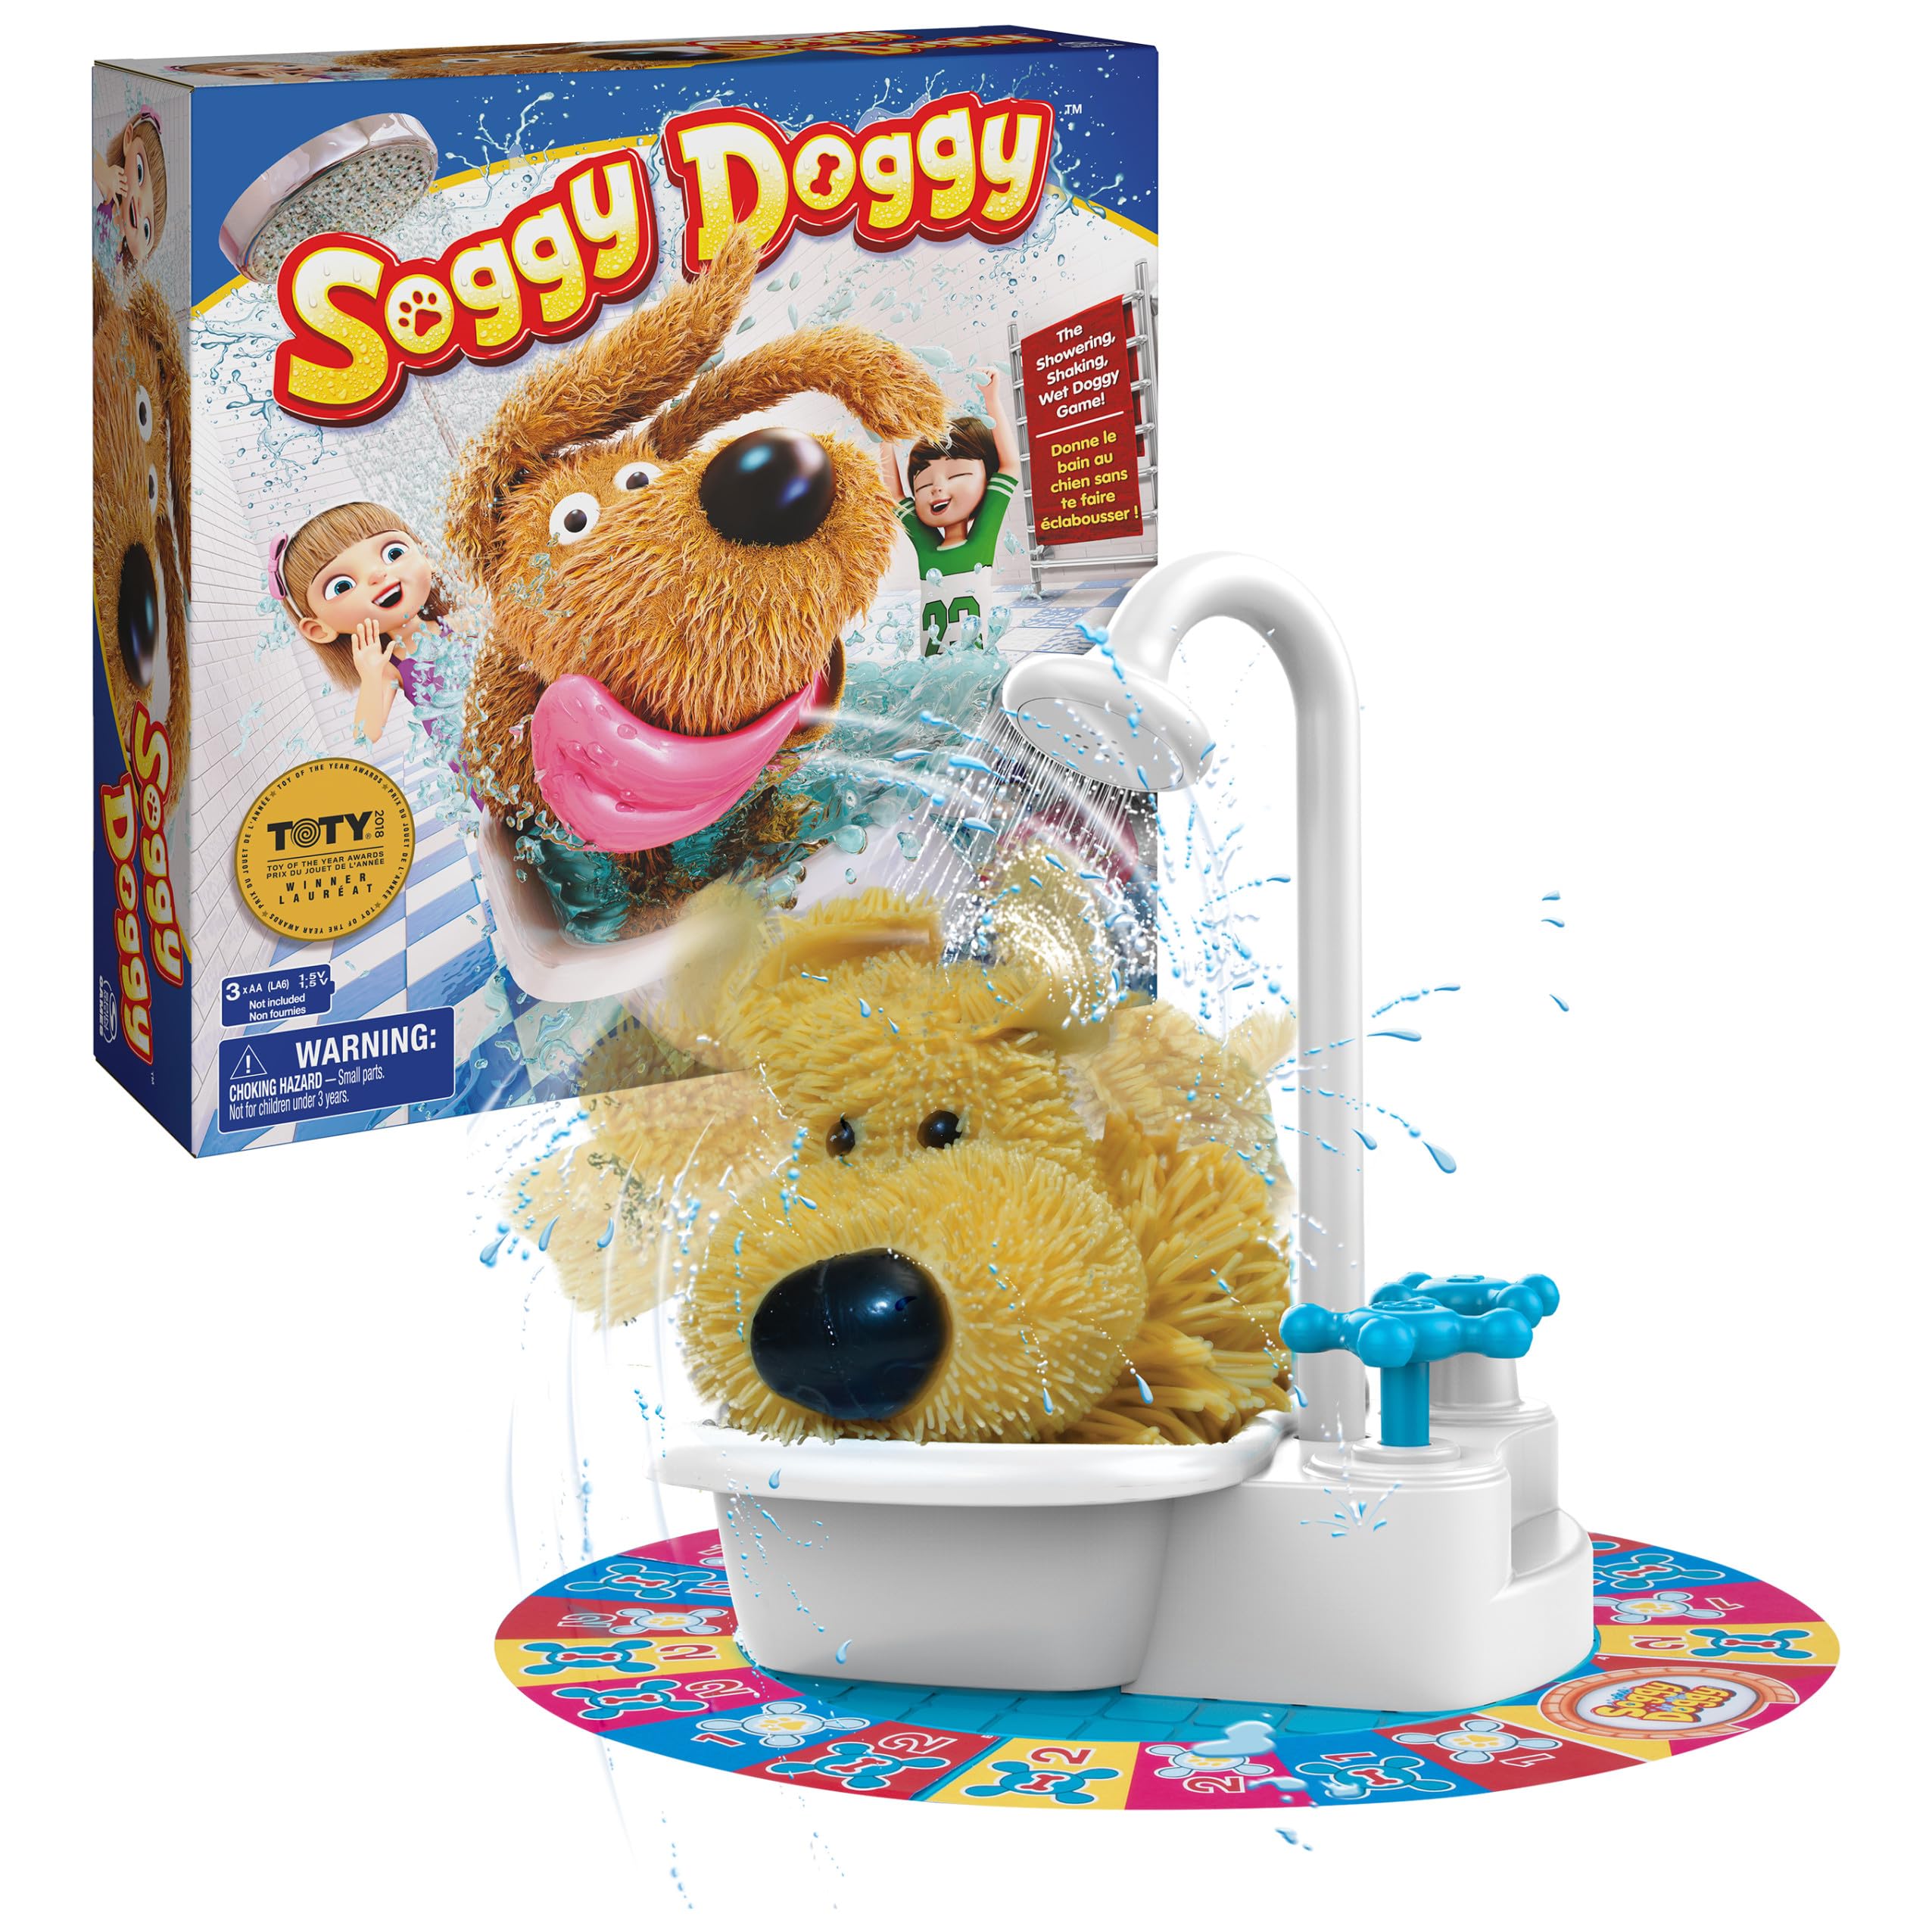 Soggy Doggy: The Showering, Shaking, Wet Dog Kids Board Game $6.40 + Free Shipping w/ Prime or on $35+